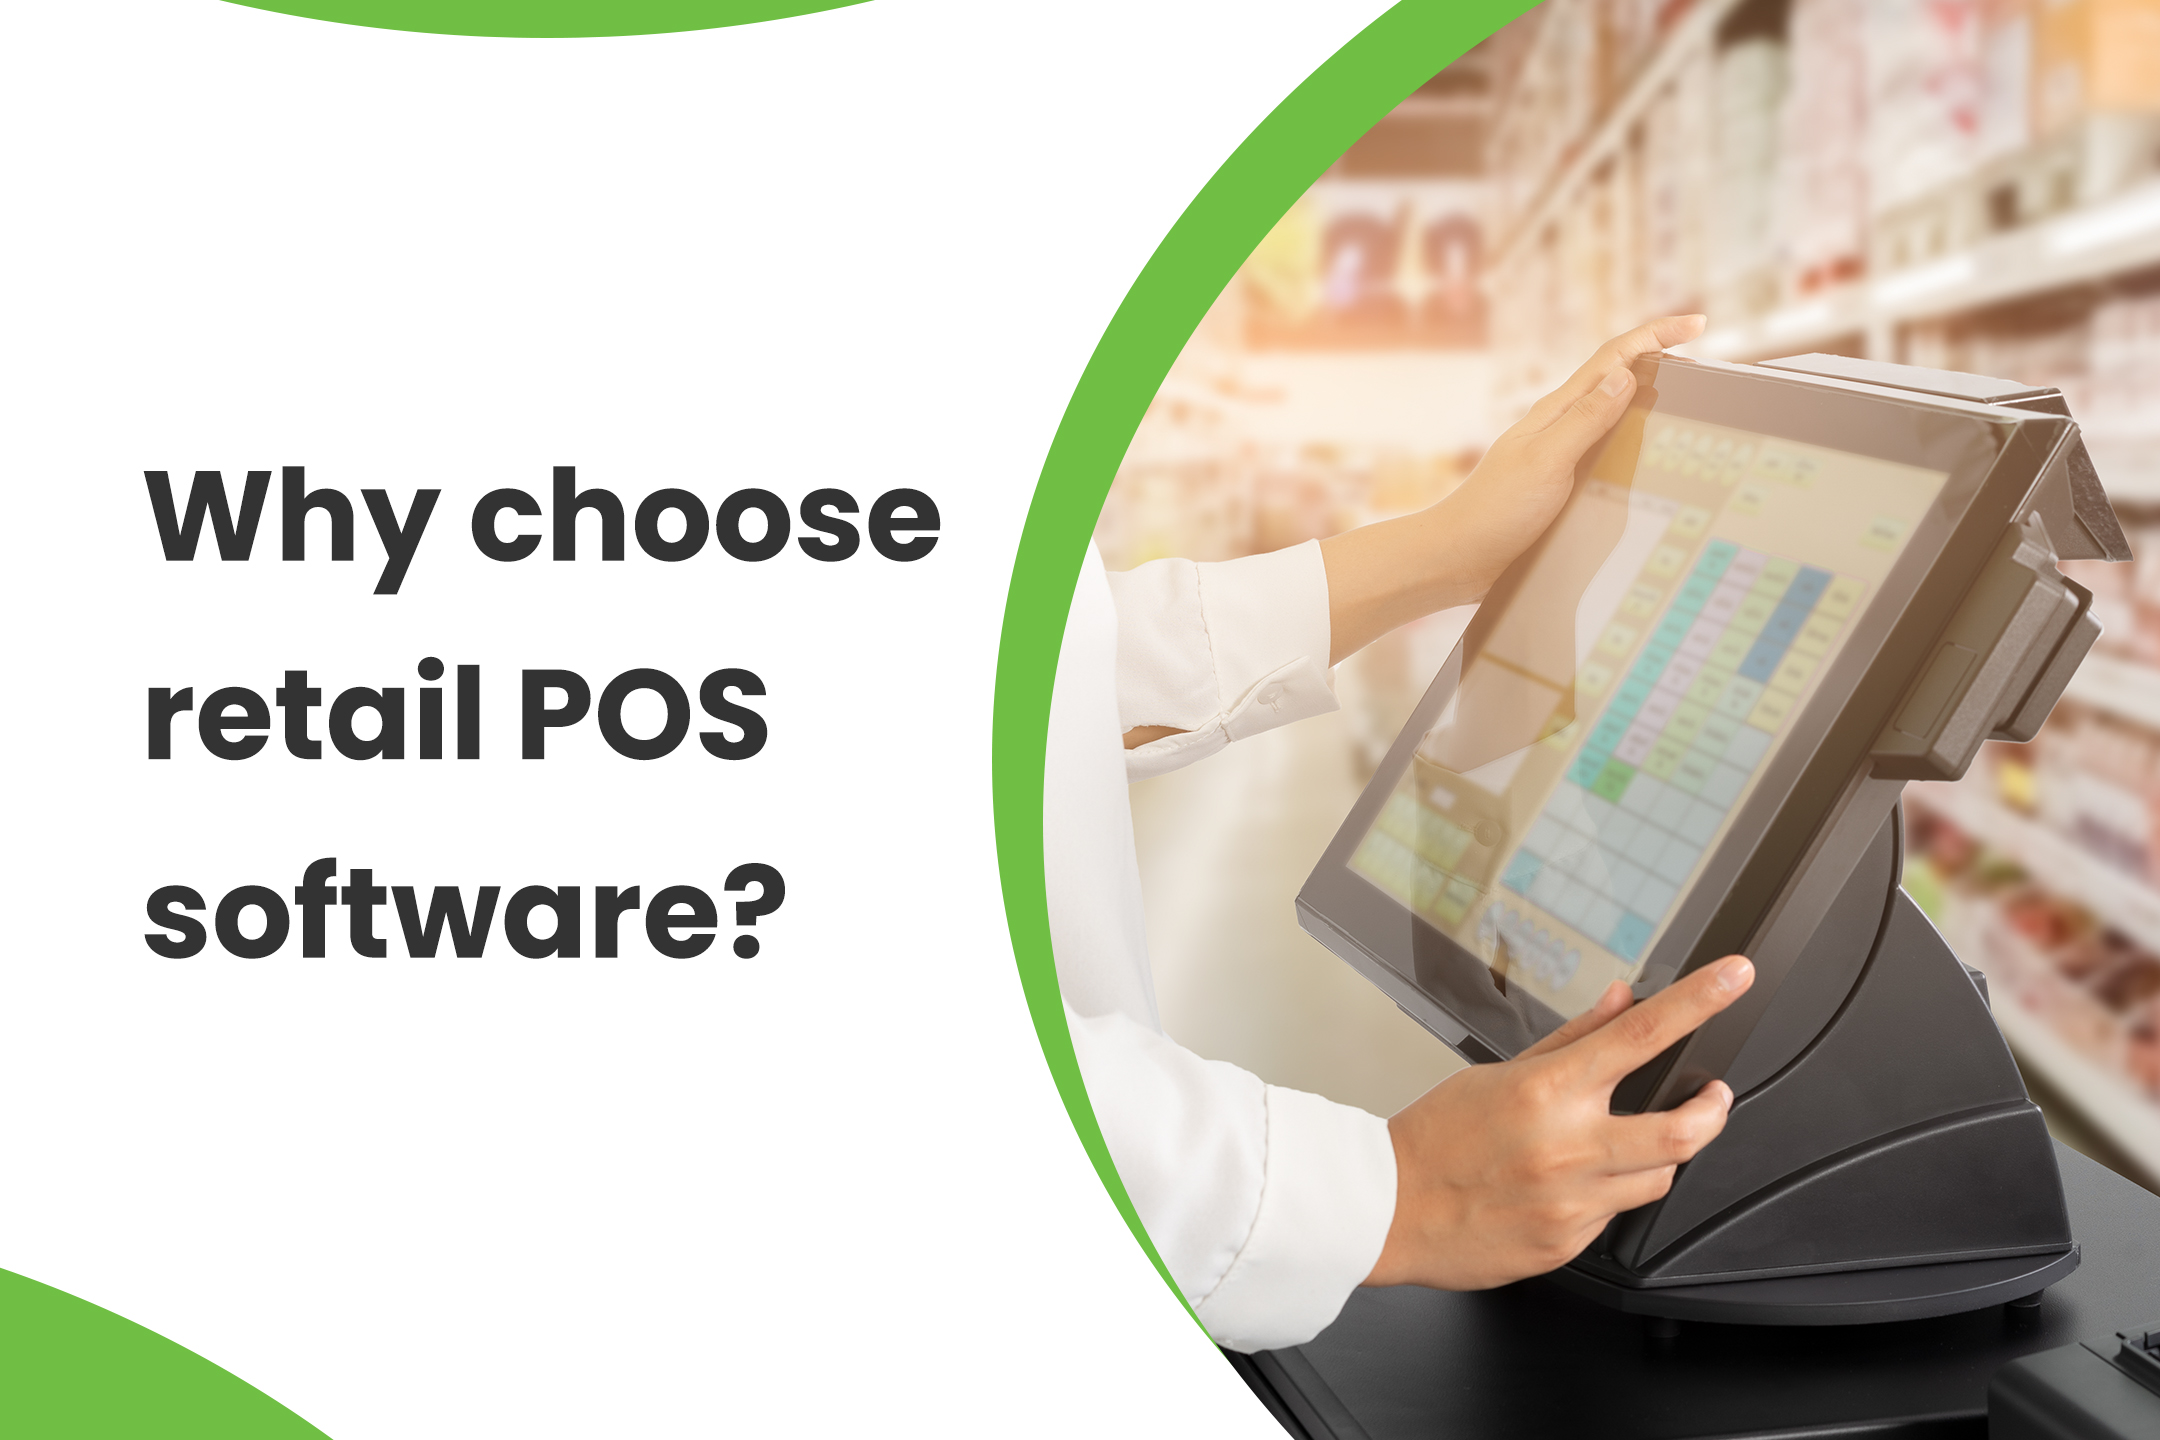 Why choose retail POS software?